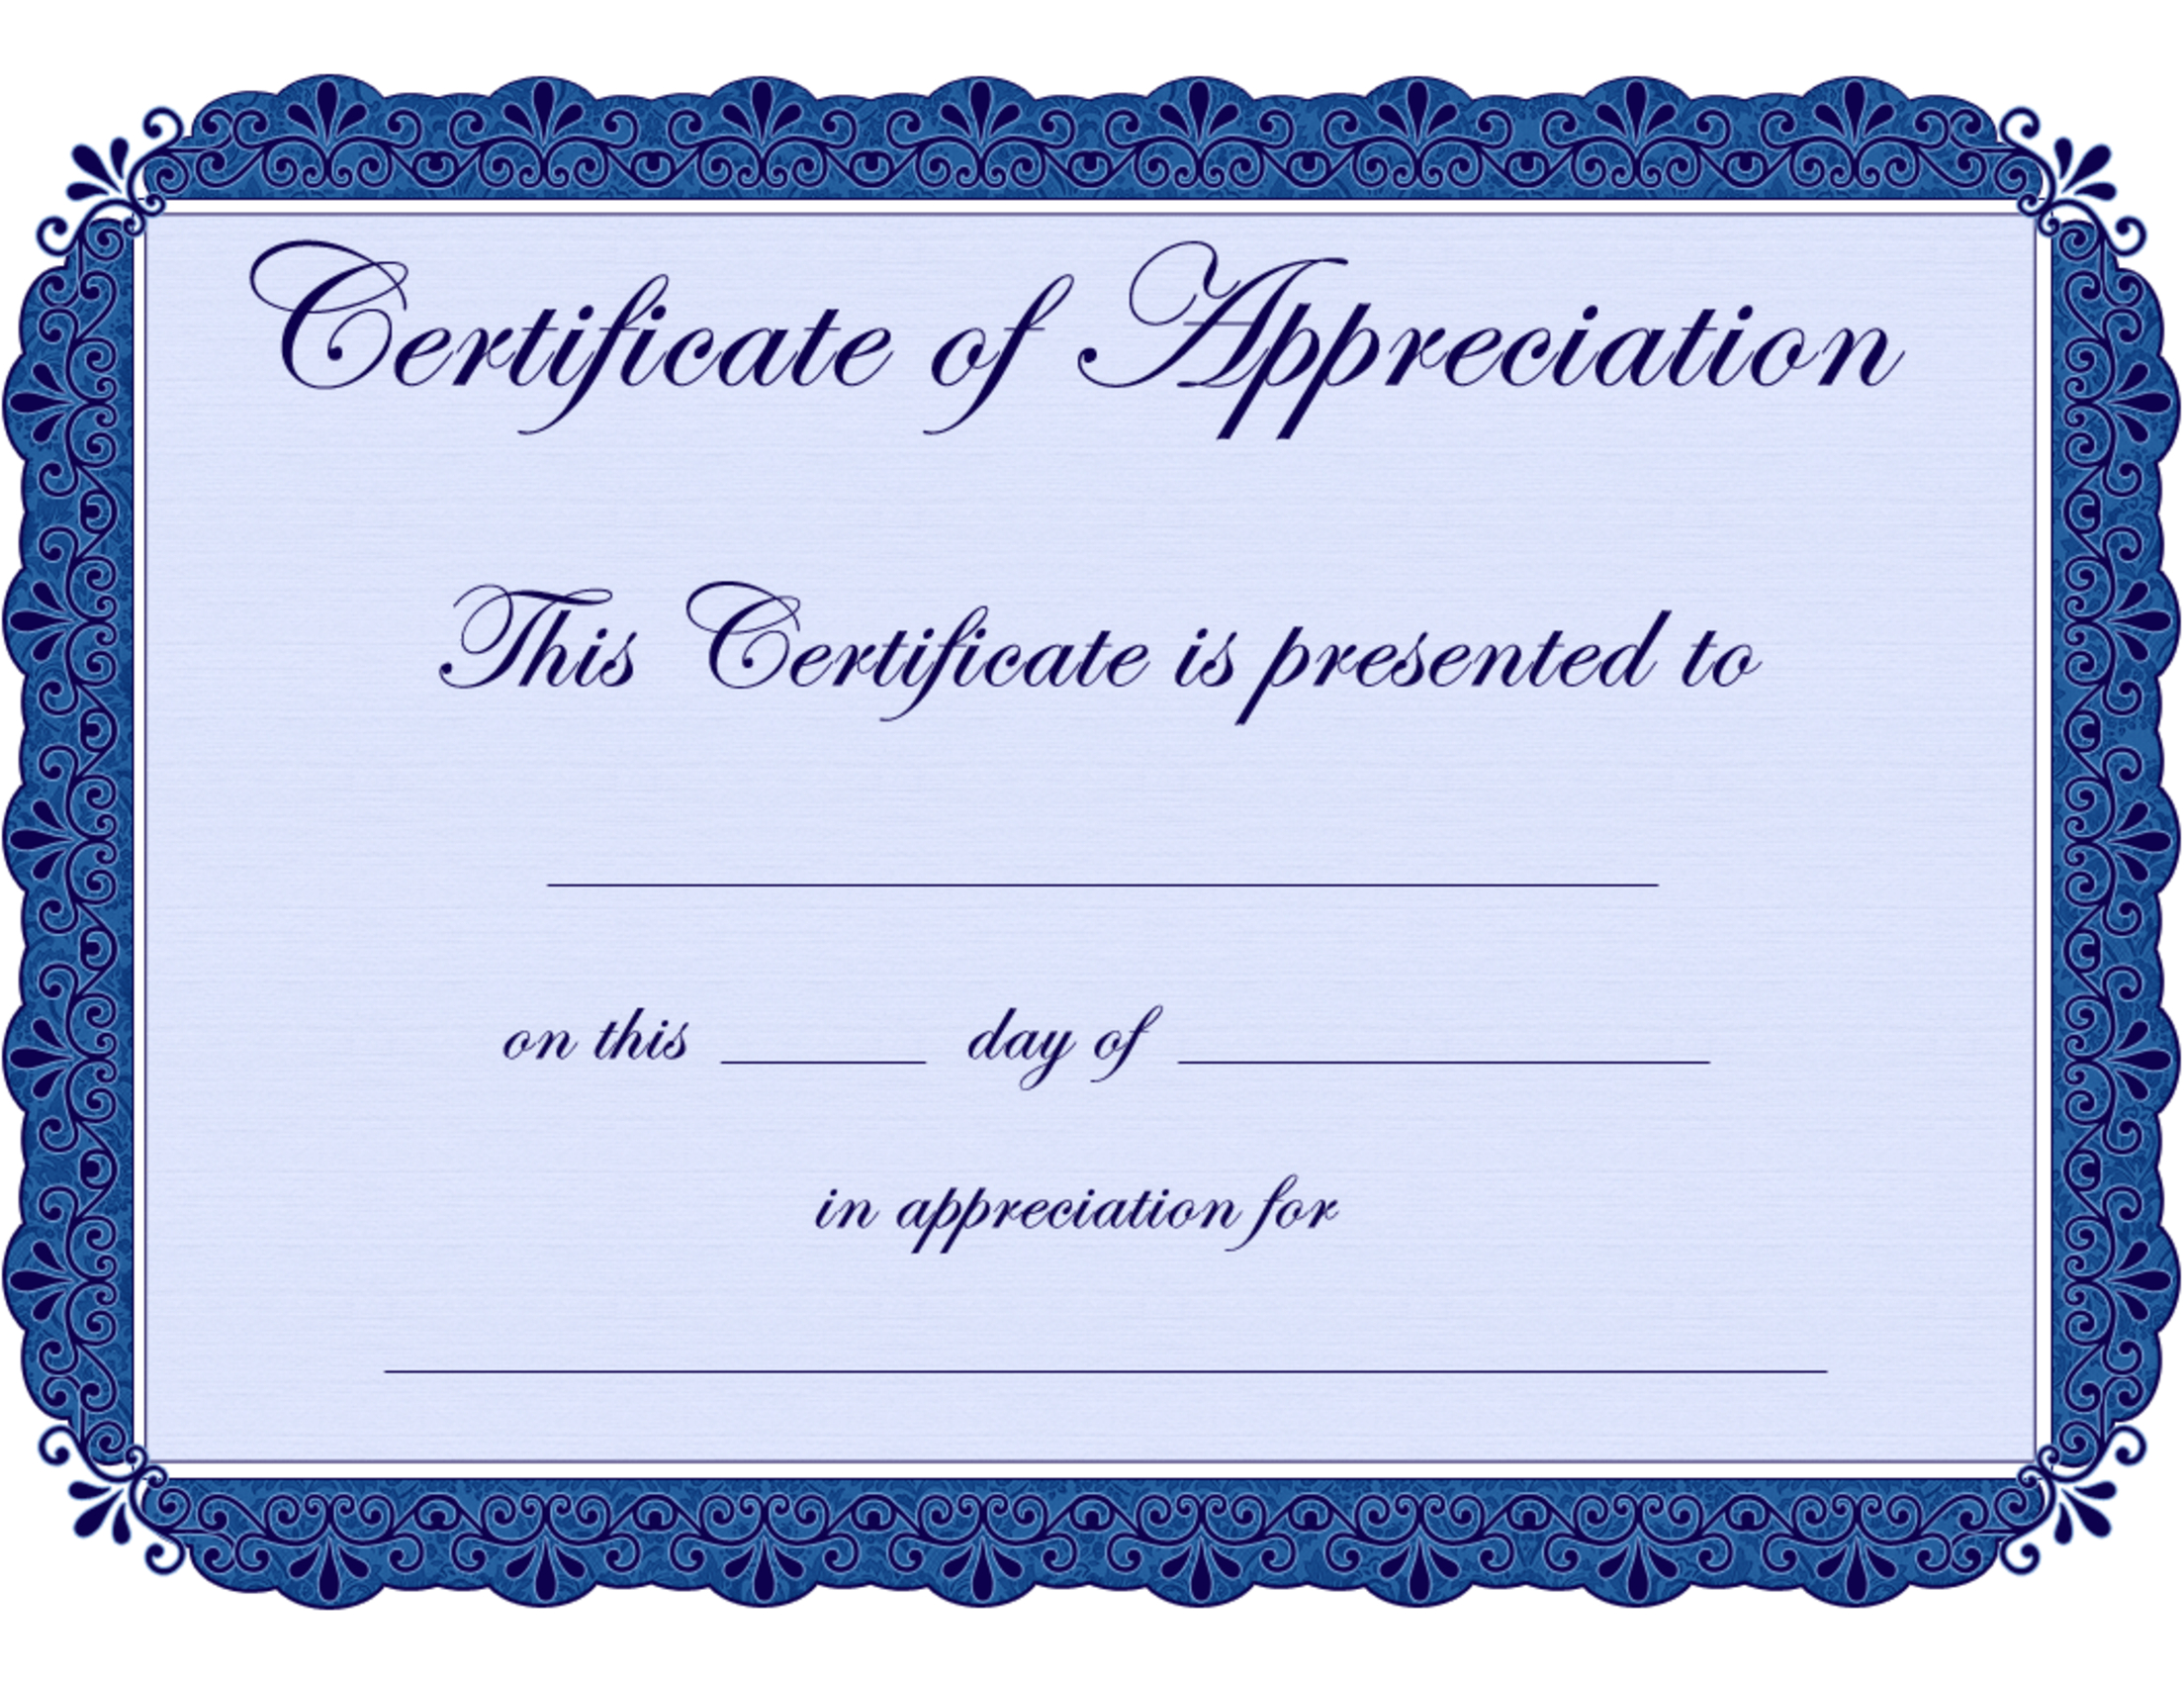 Free Printable Certificates Certificate Of Appreciation Certificate - Free Printable Certificates For Teachers